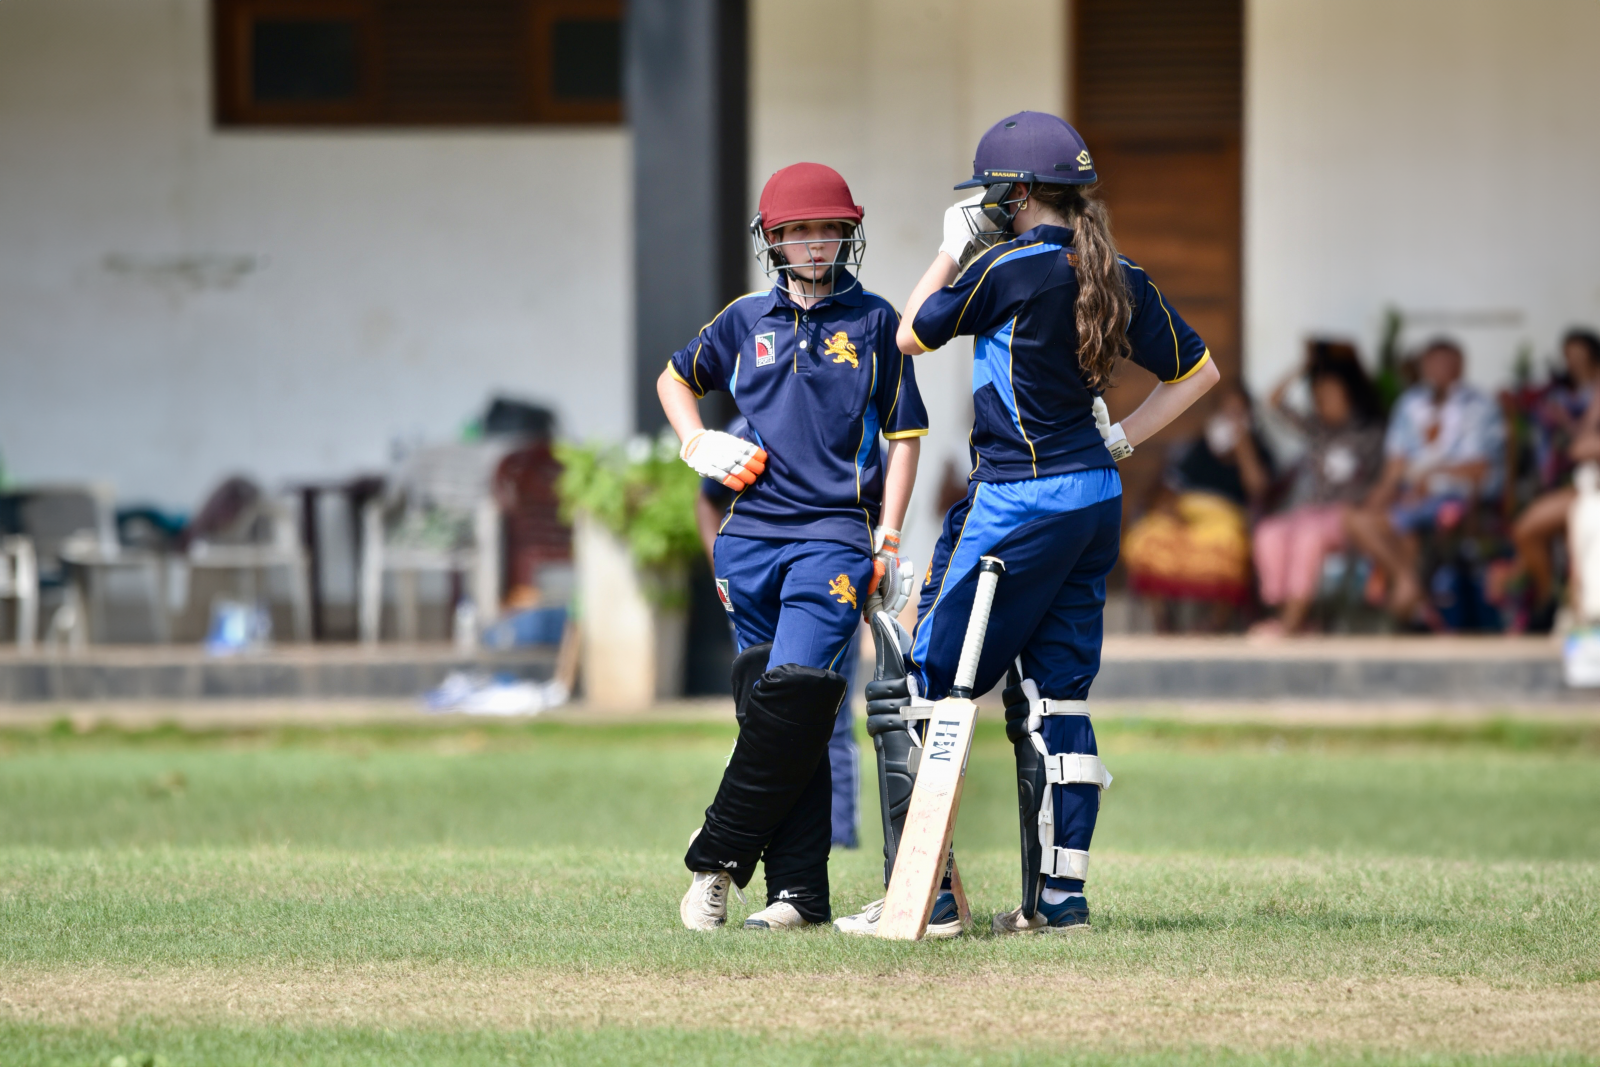 Maggie Haffenden (left) speaks to Lily Innes at the crease during the game against Mercantile Cricket Association Girls.